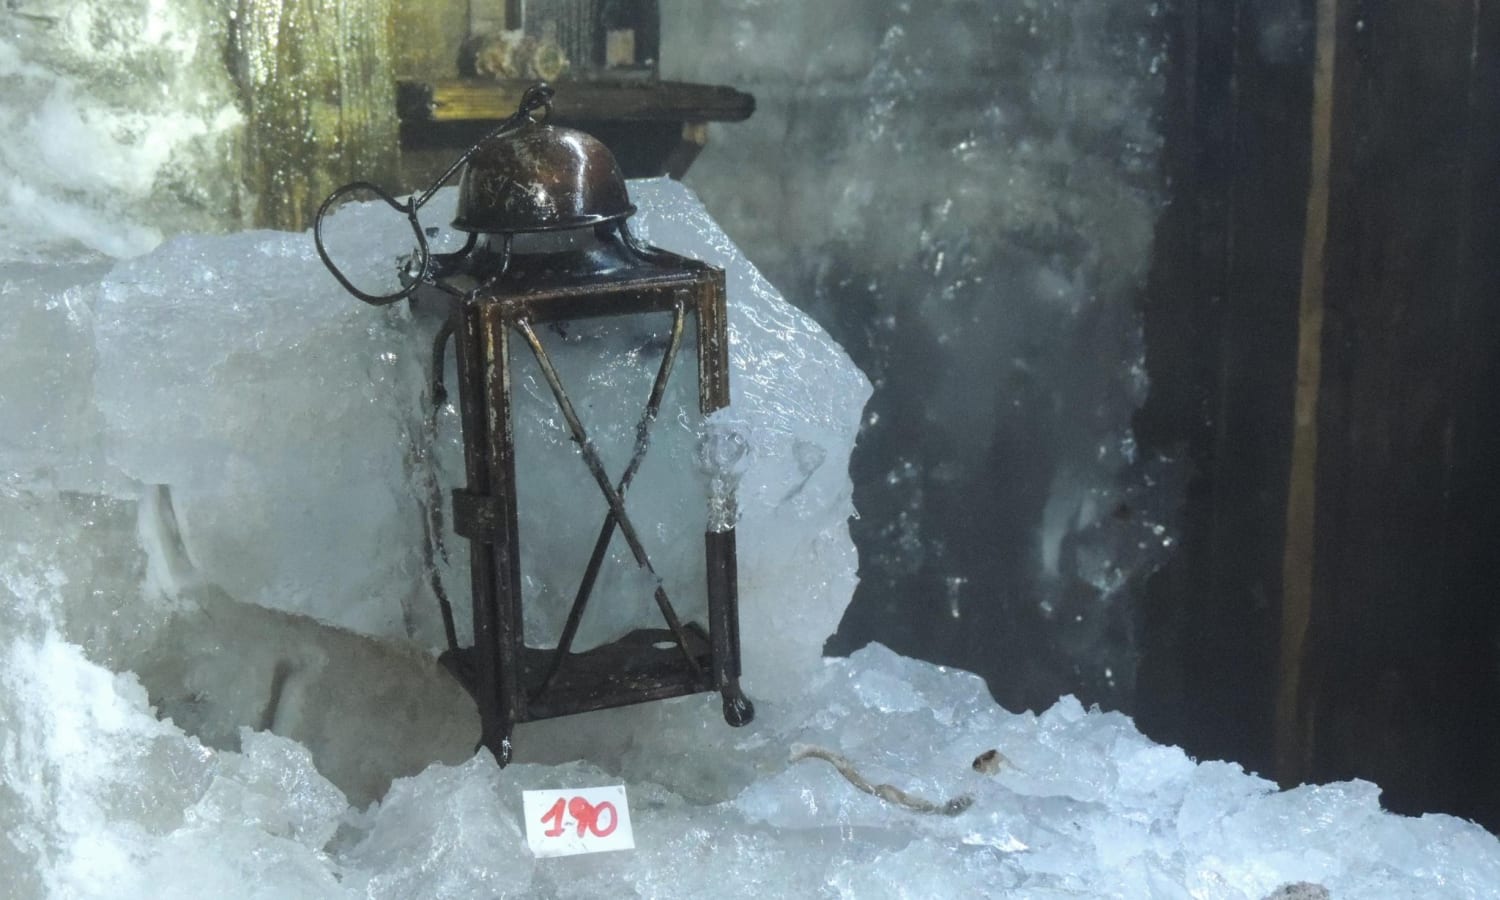 A lantern found at a cave barracks on Mount Scorluzzo, Lombardy. The accelerating retreat of glaciers in the Italian Alps are revealing artifacts from the WWI theater of operations .